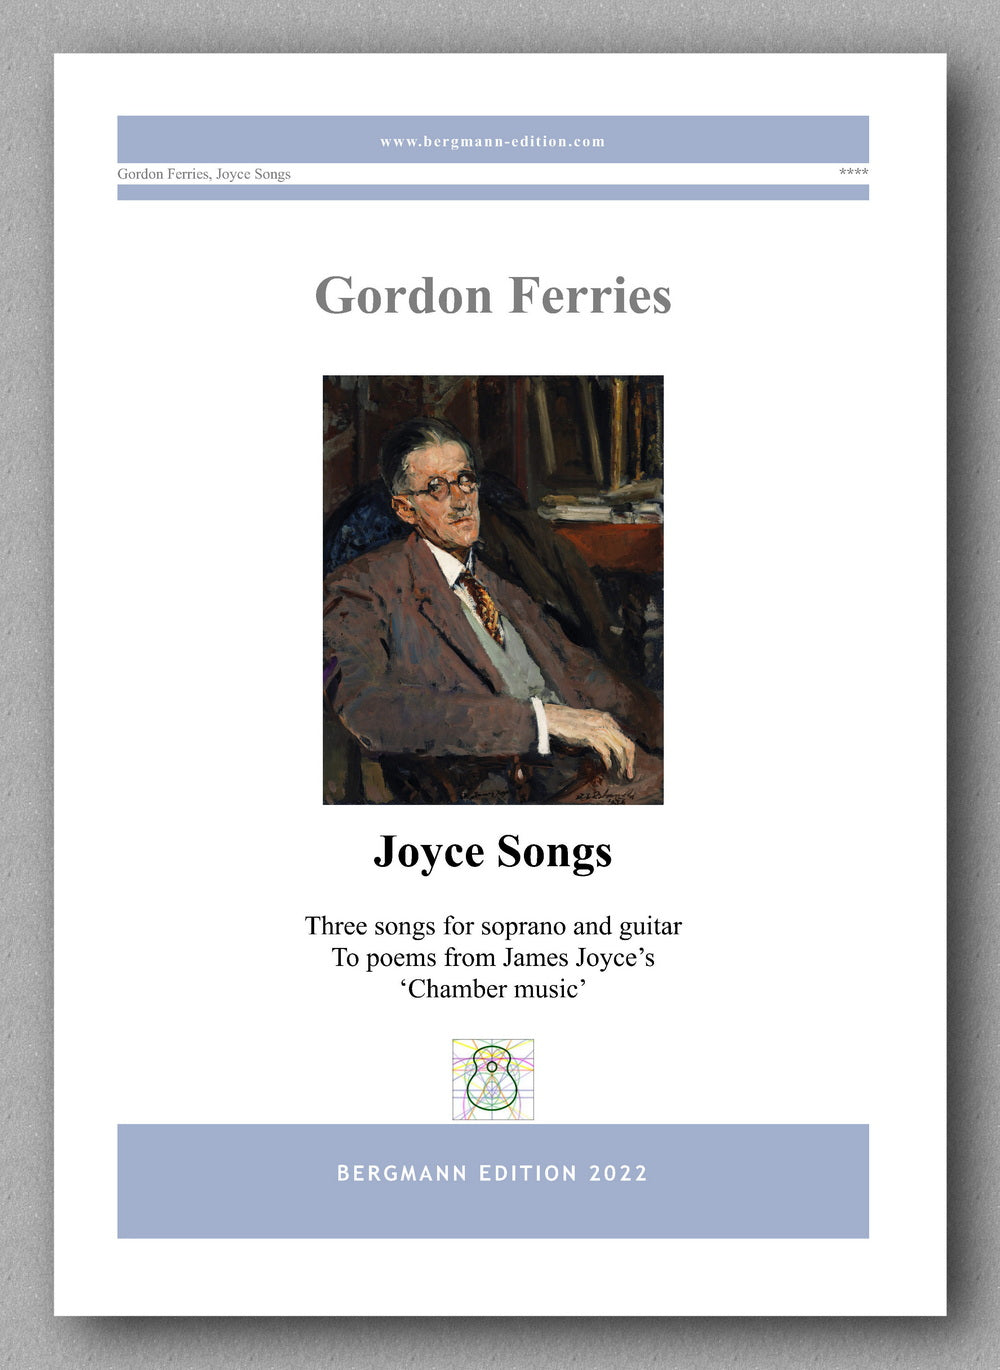 Gordon Ferries, Joyce Songs - preview of the cover